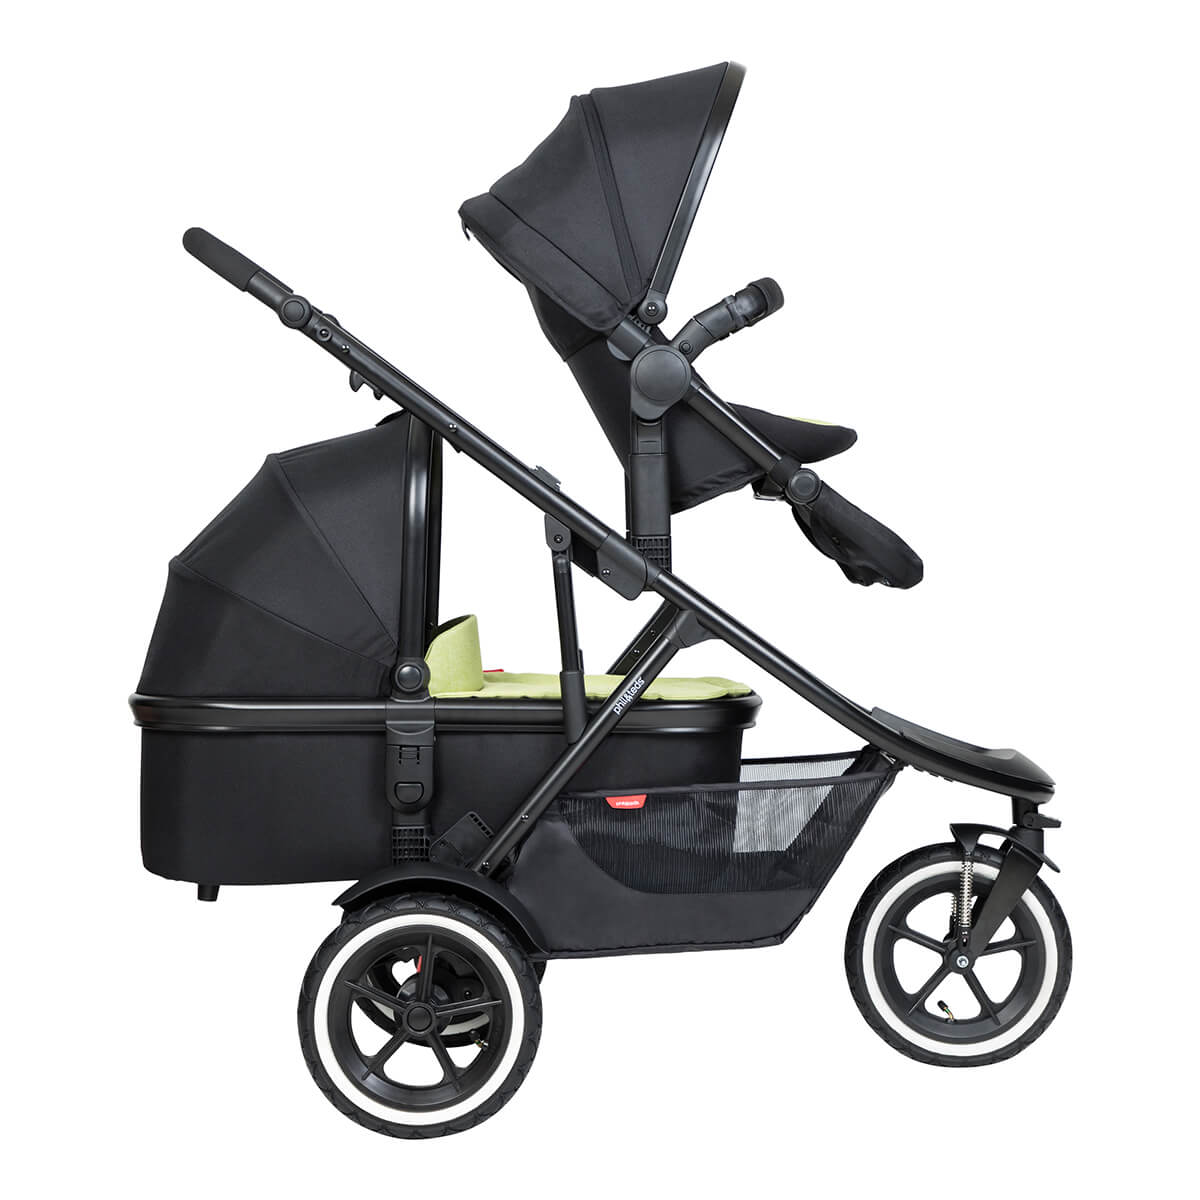 https://cdn.accentuate.io/7323497496664/19272668282968/philteds-sport-buggy-with-double-kit-extended-clip-and-snug-carrycot-side-view-v1667535543143.jpg?1200x1200